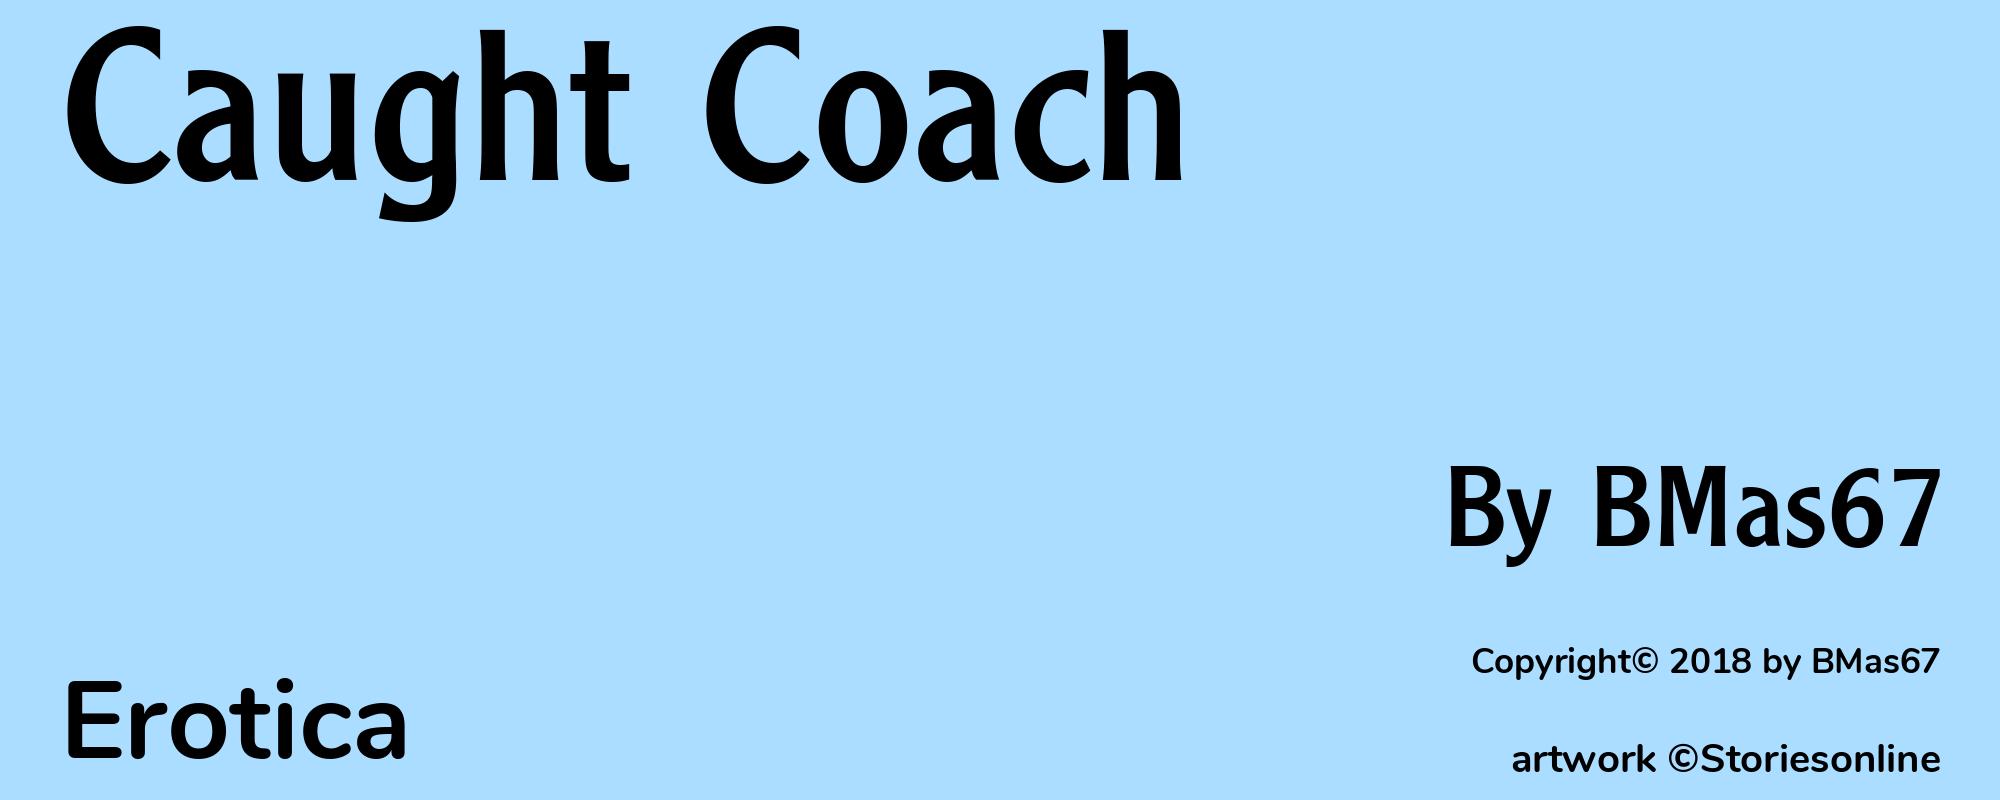 Caught Coach - Cover